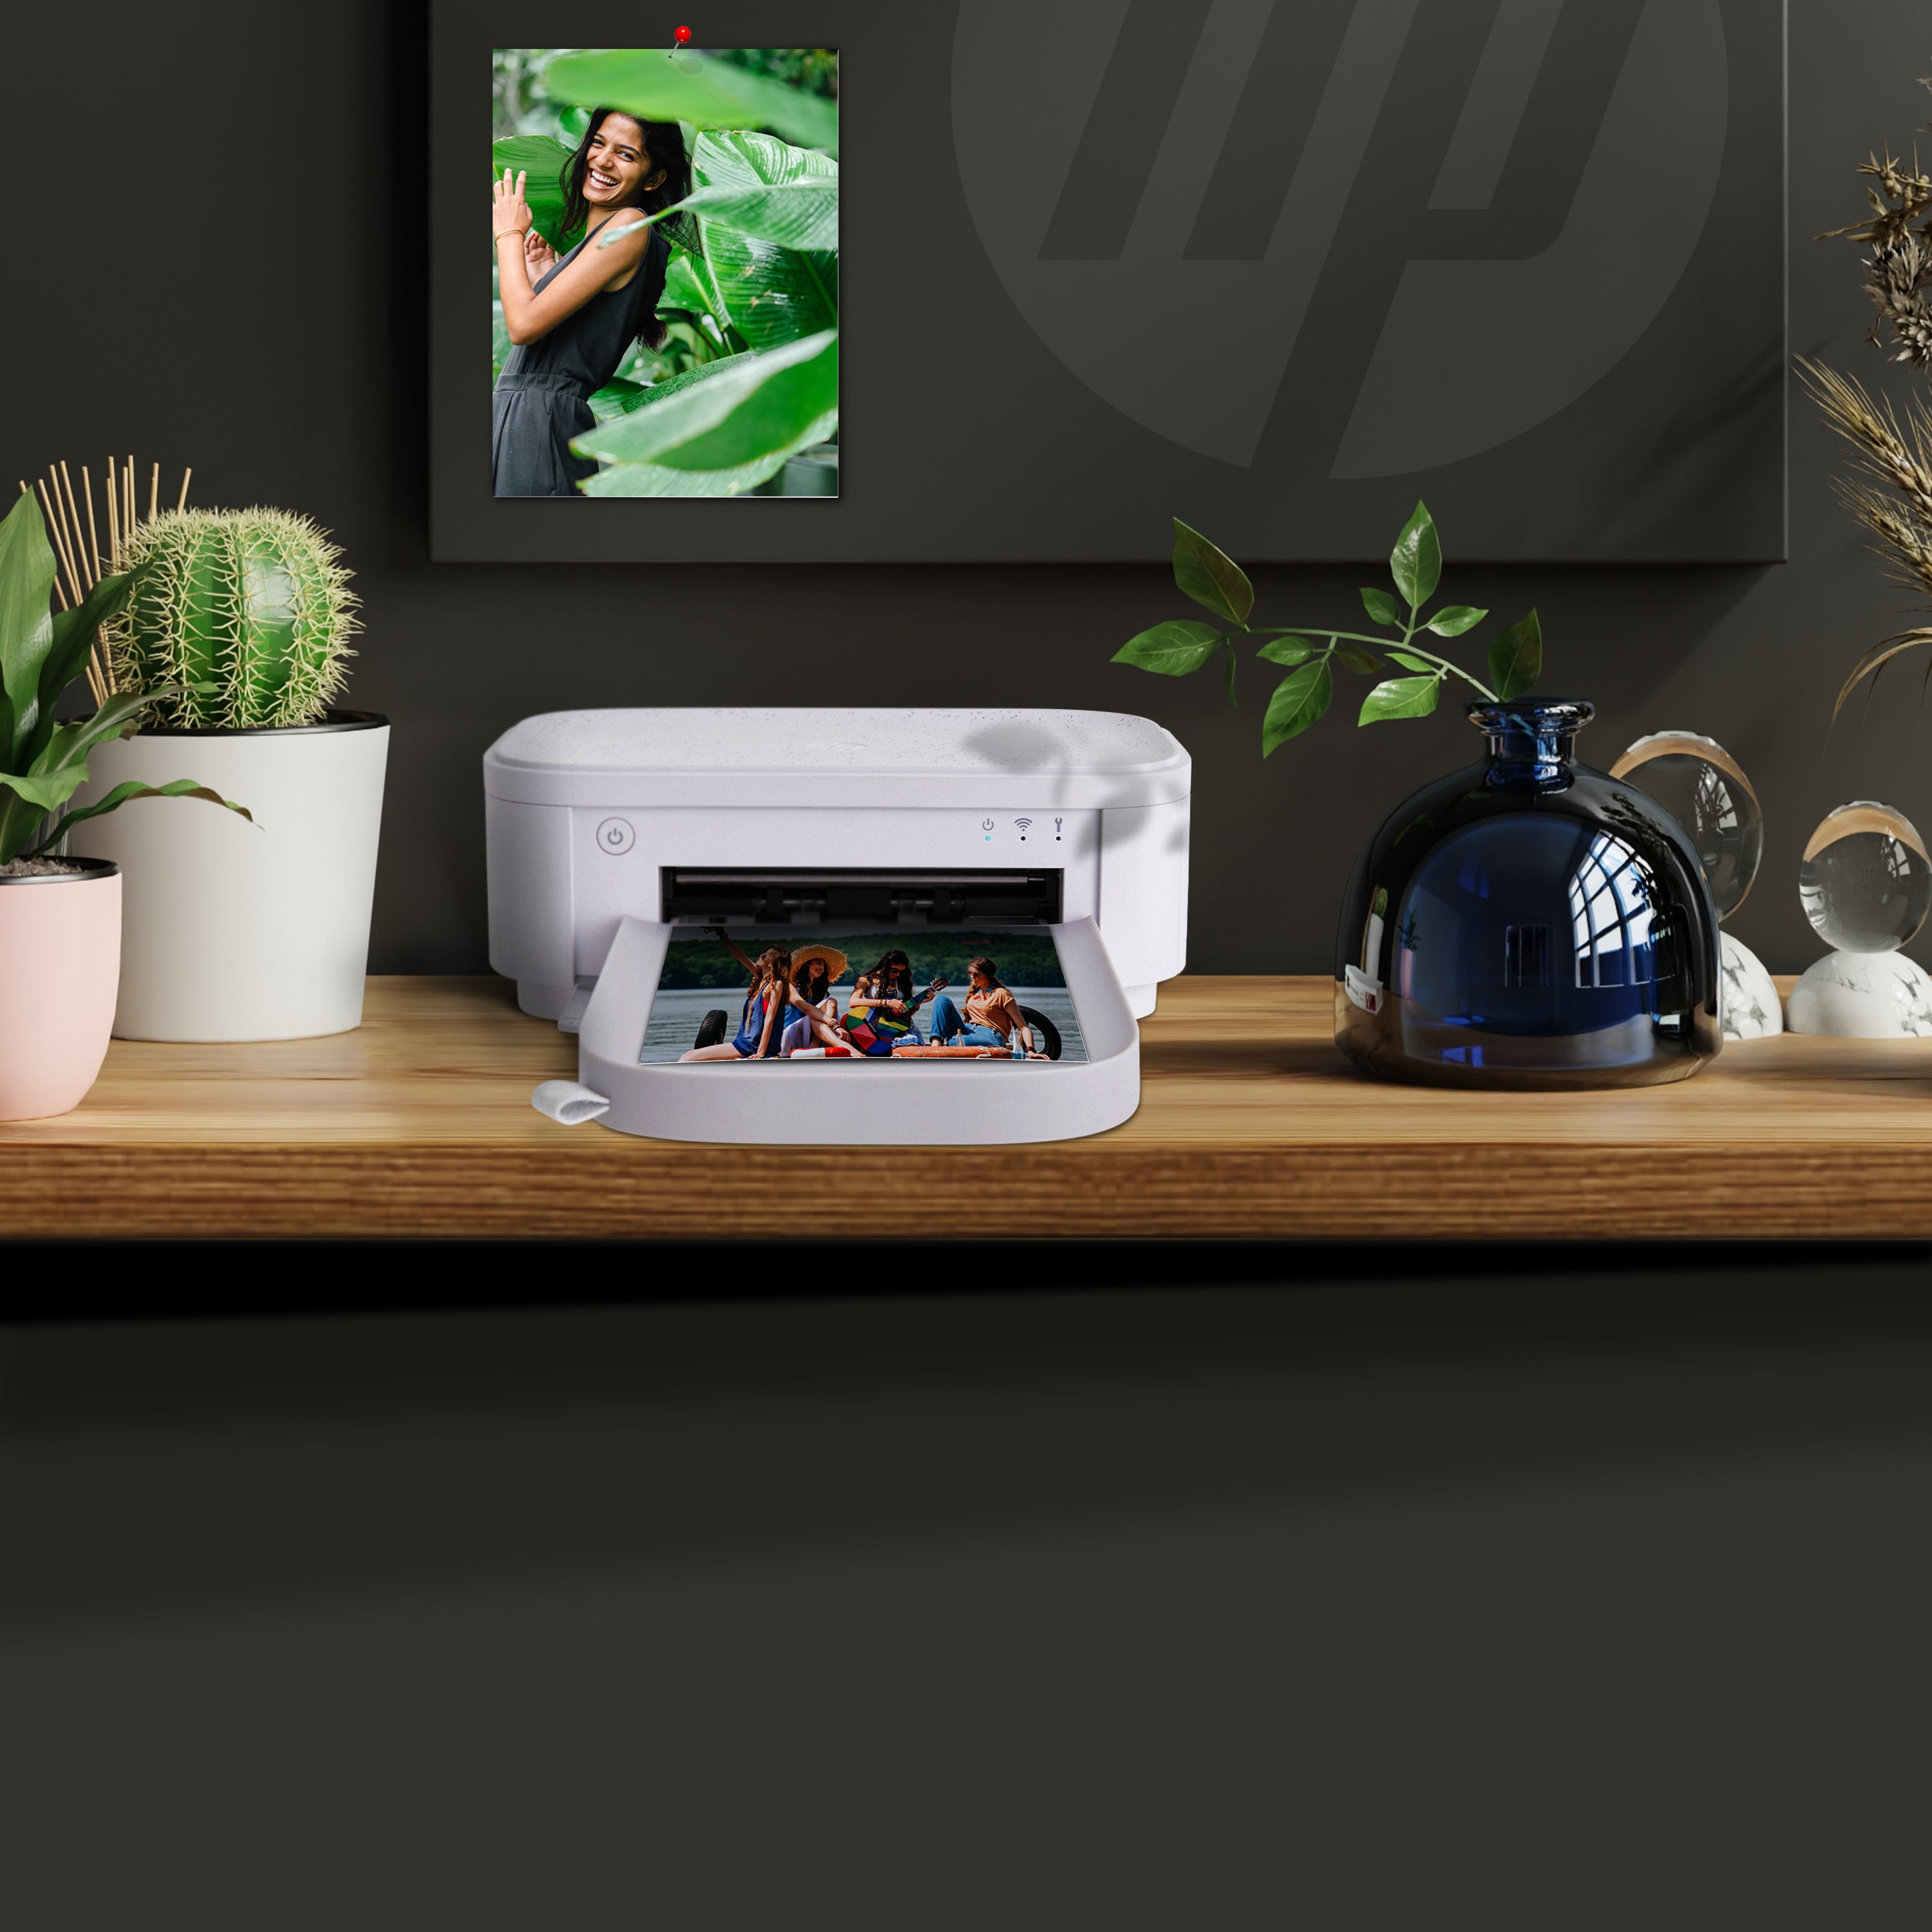 We Review the HP Sprocket Studio Plus: A Capable, if Pricey, Photo Printer